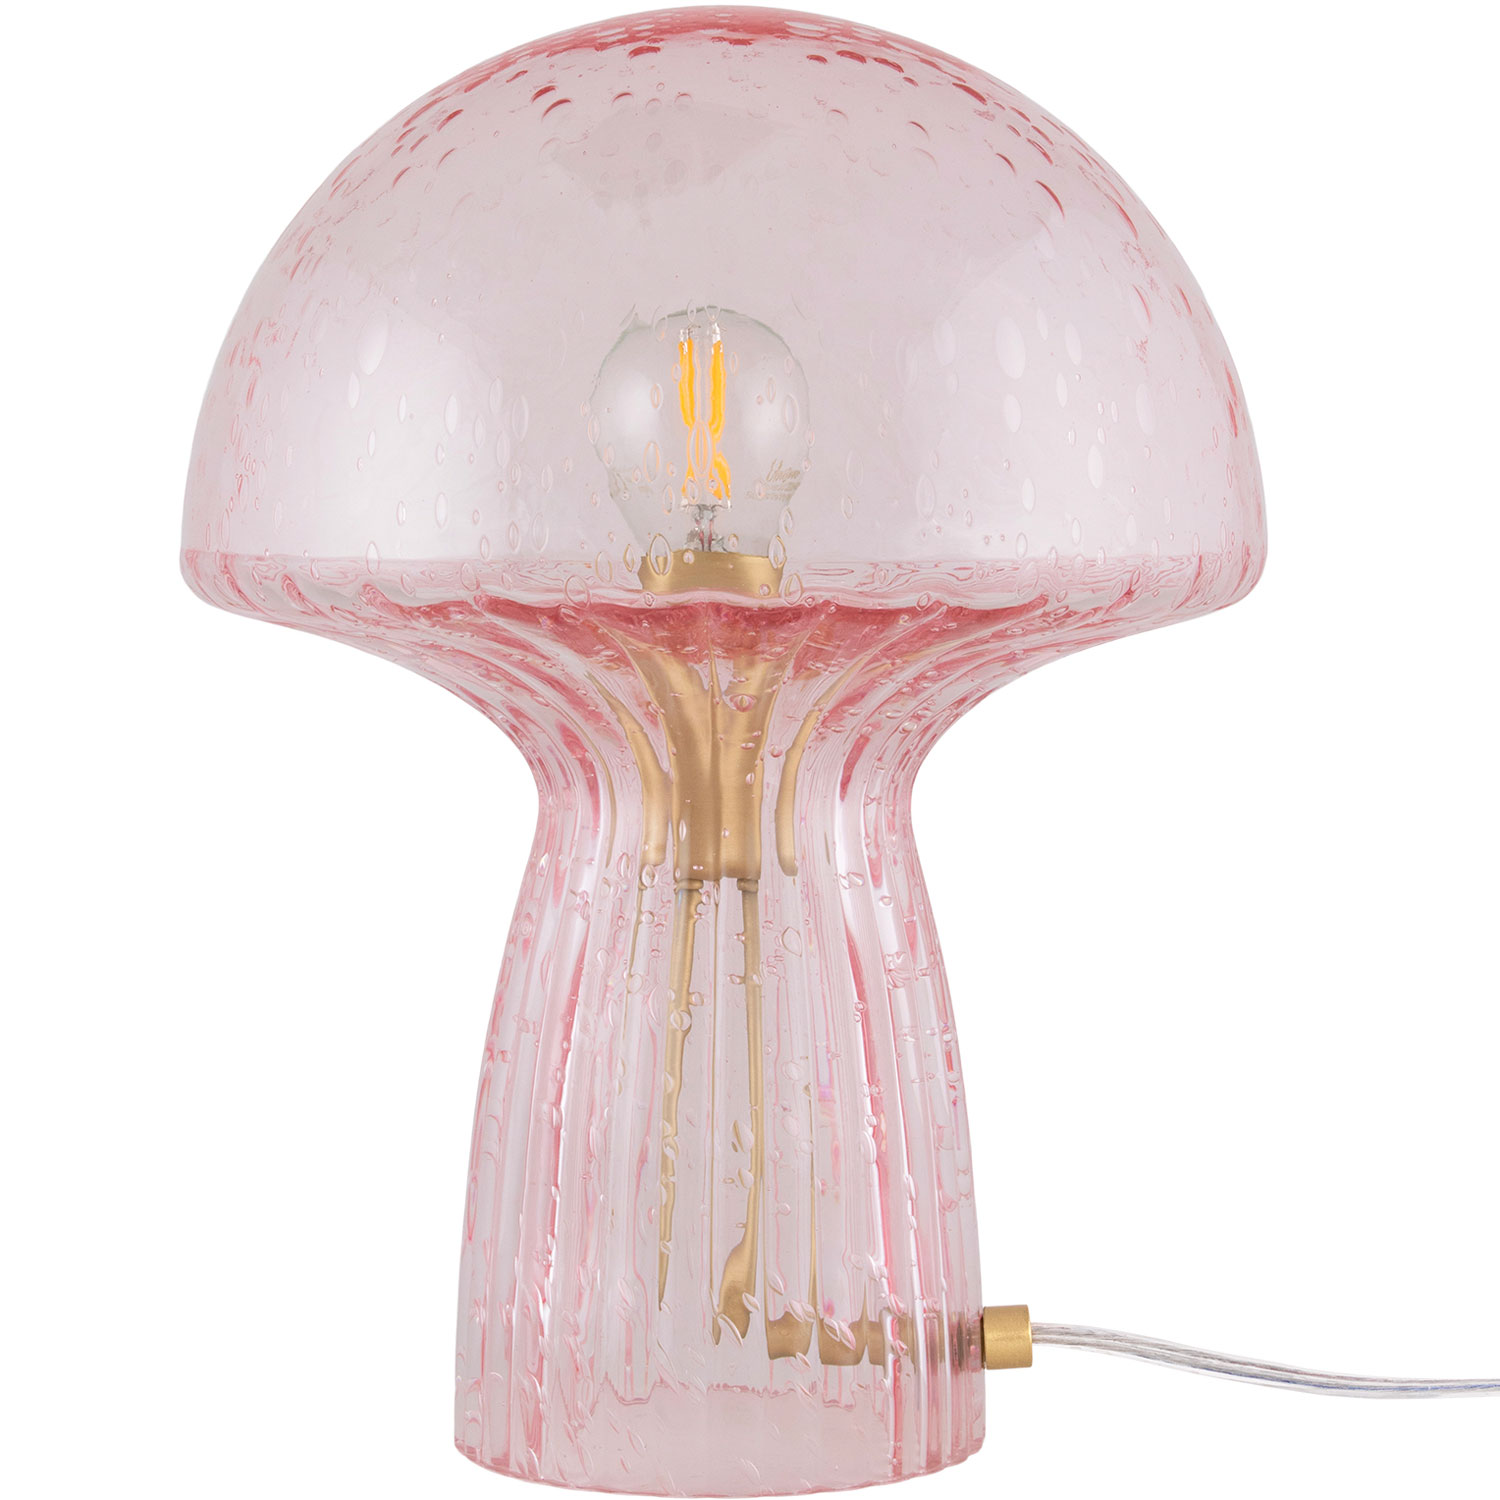 Fungo 22 Table Lamp Special Edition, Pink - Globen Lighting